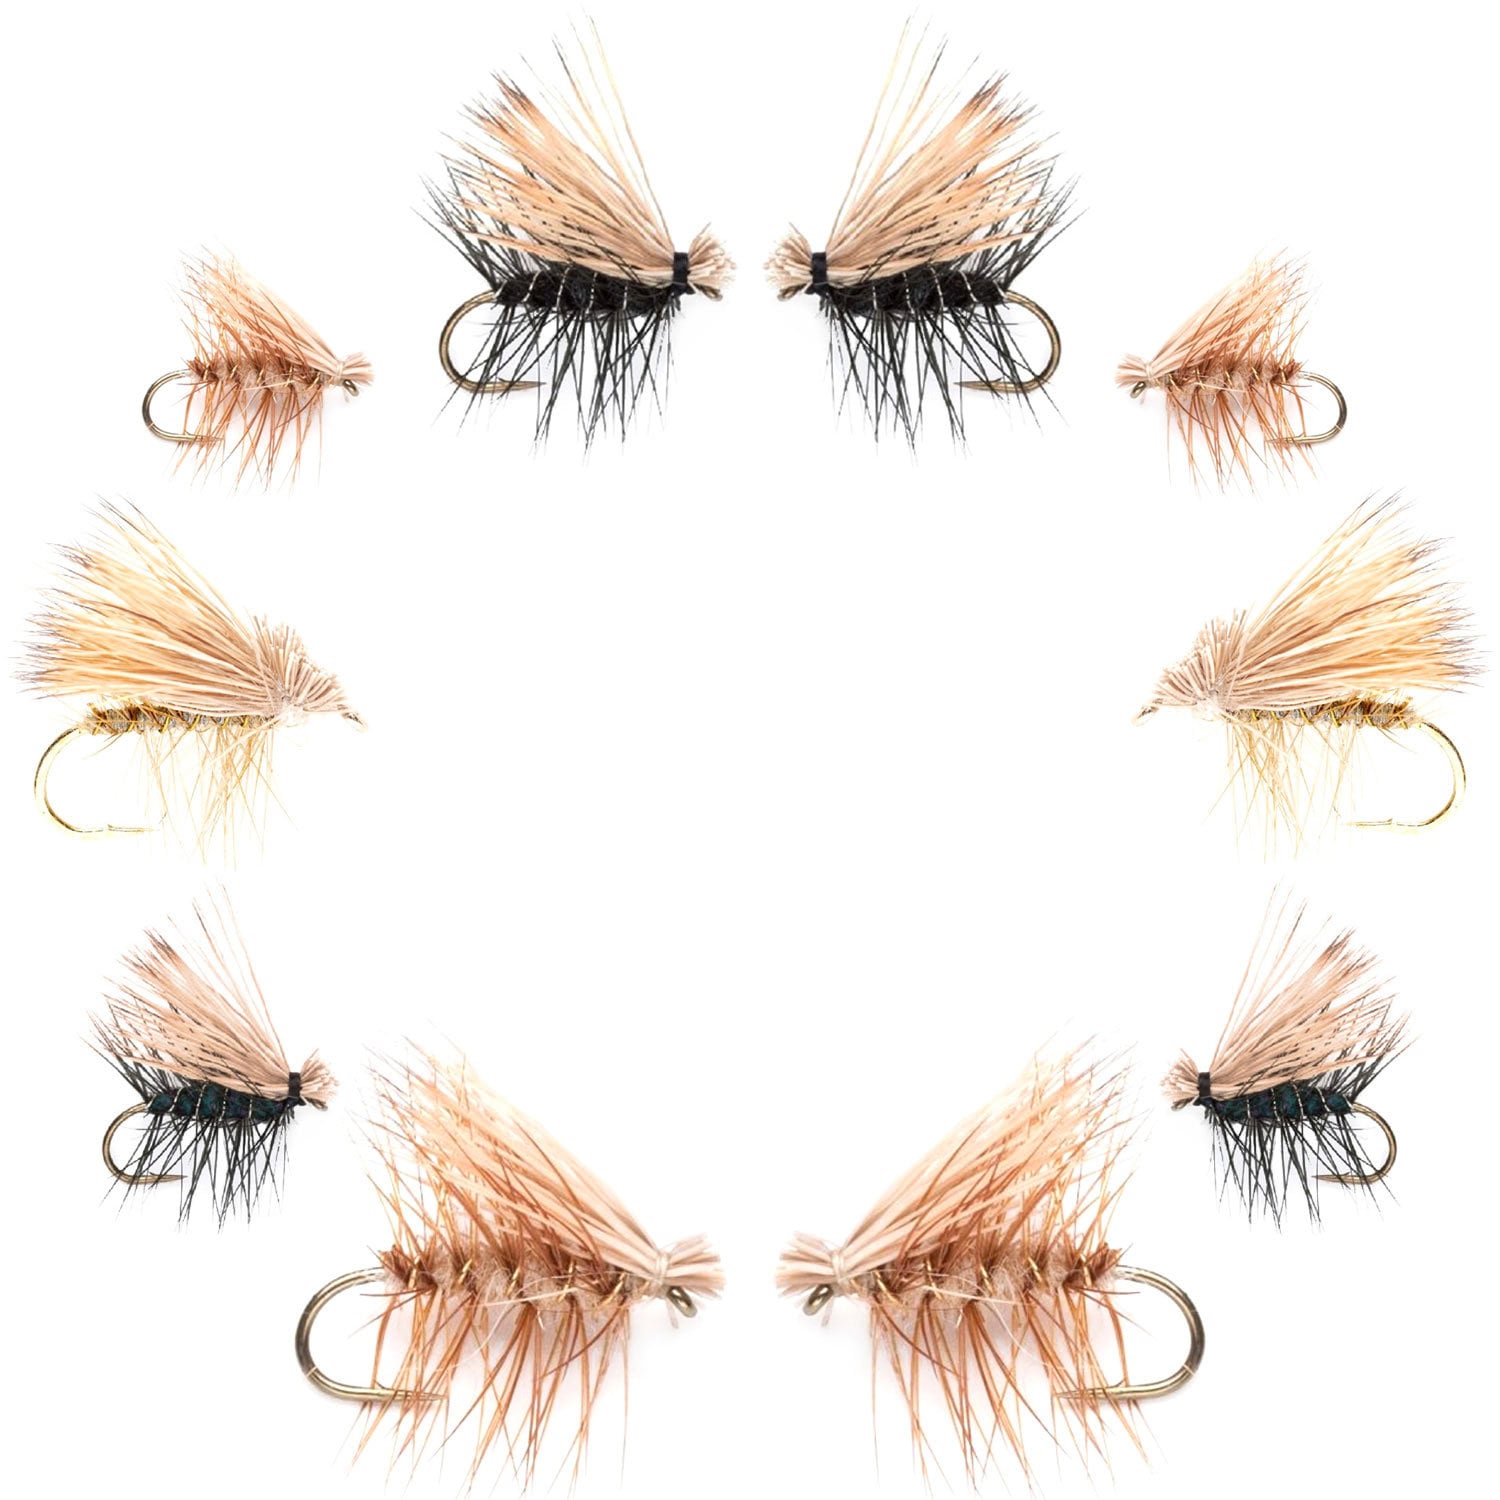 Elk Hair Caddis Dry Fly Assortment - The Fly Fishing Place Basics  Collection - 10 Dry Fishing Flies - 5 Patterns - Hook Sizes 12, 14, 16